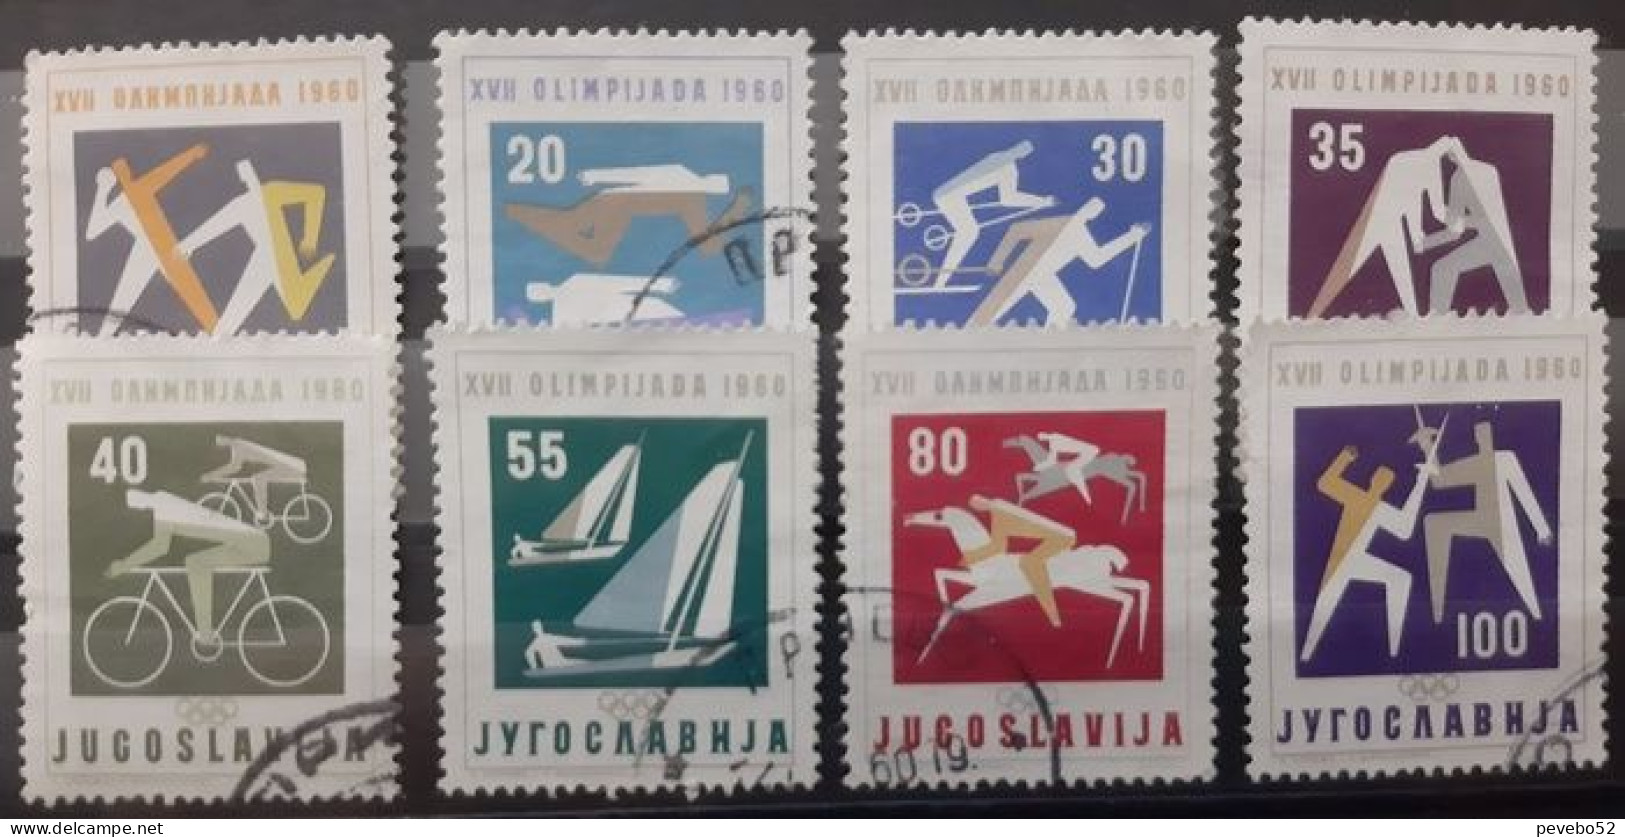 YUGOSLAVIA 1960 - Olympic Games - Rome, Italy USED - Oblitérés